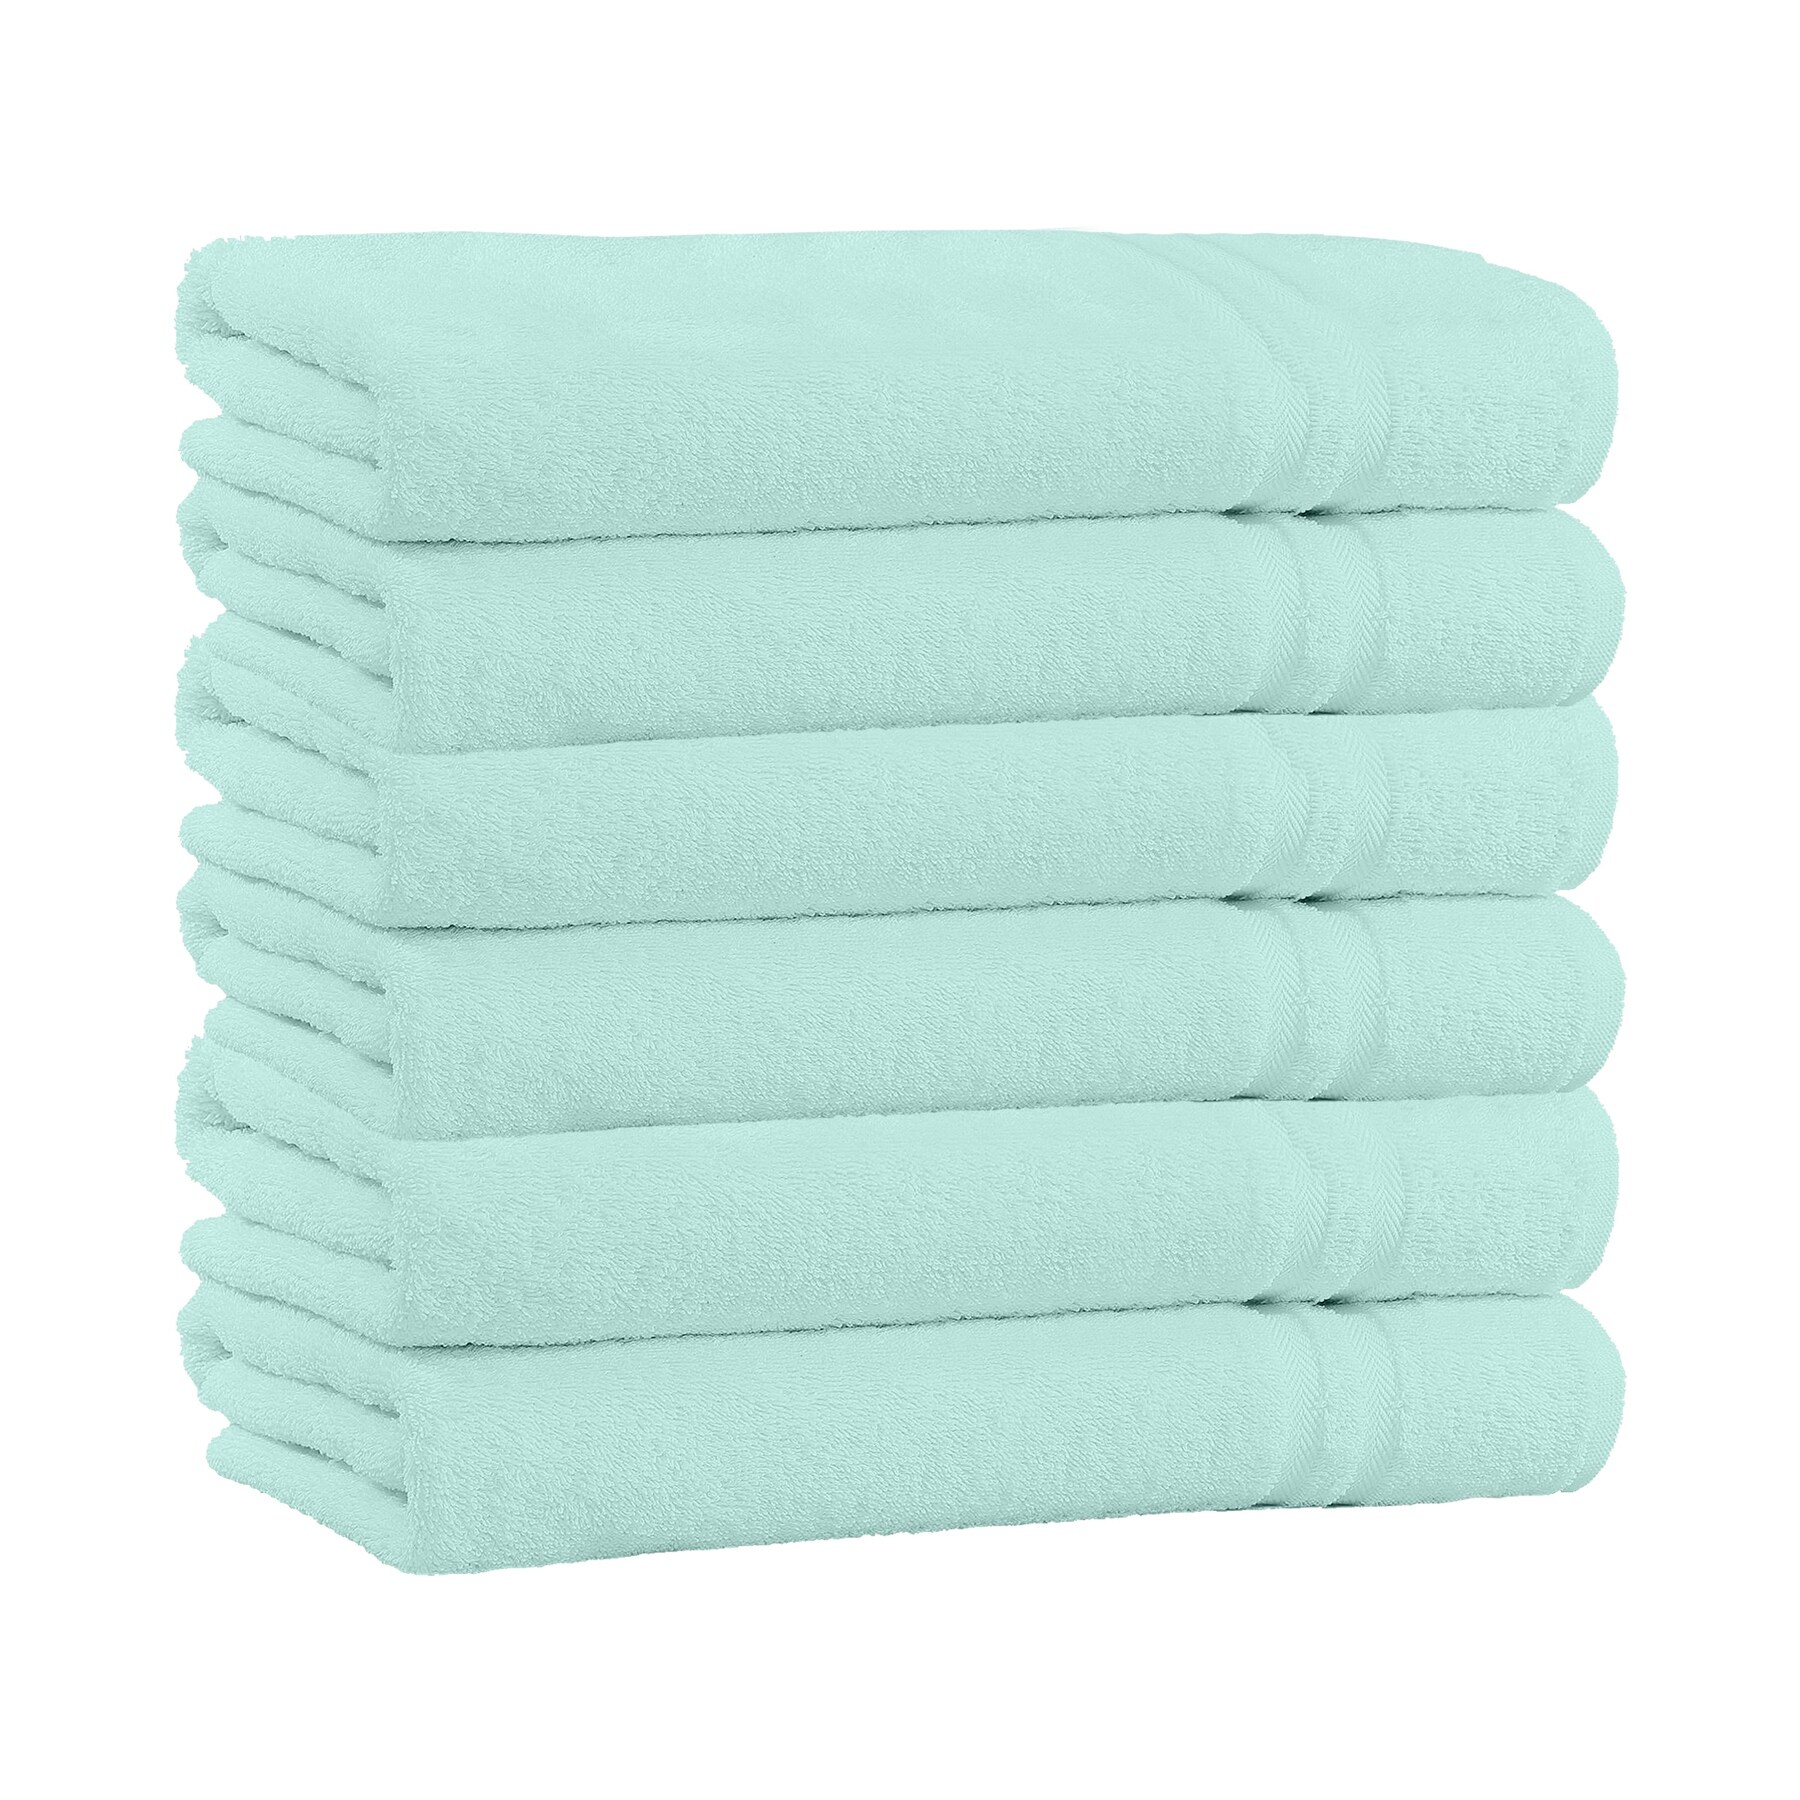 5-Pack 100% Cotton Extra Plush & Absorbent Bath Towels - Bed Bath & Beyond  - 33559098